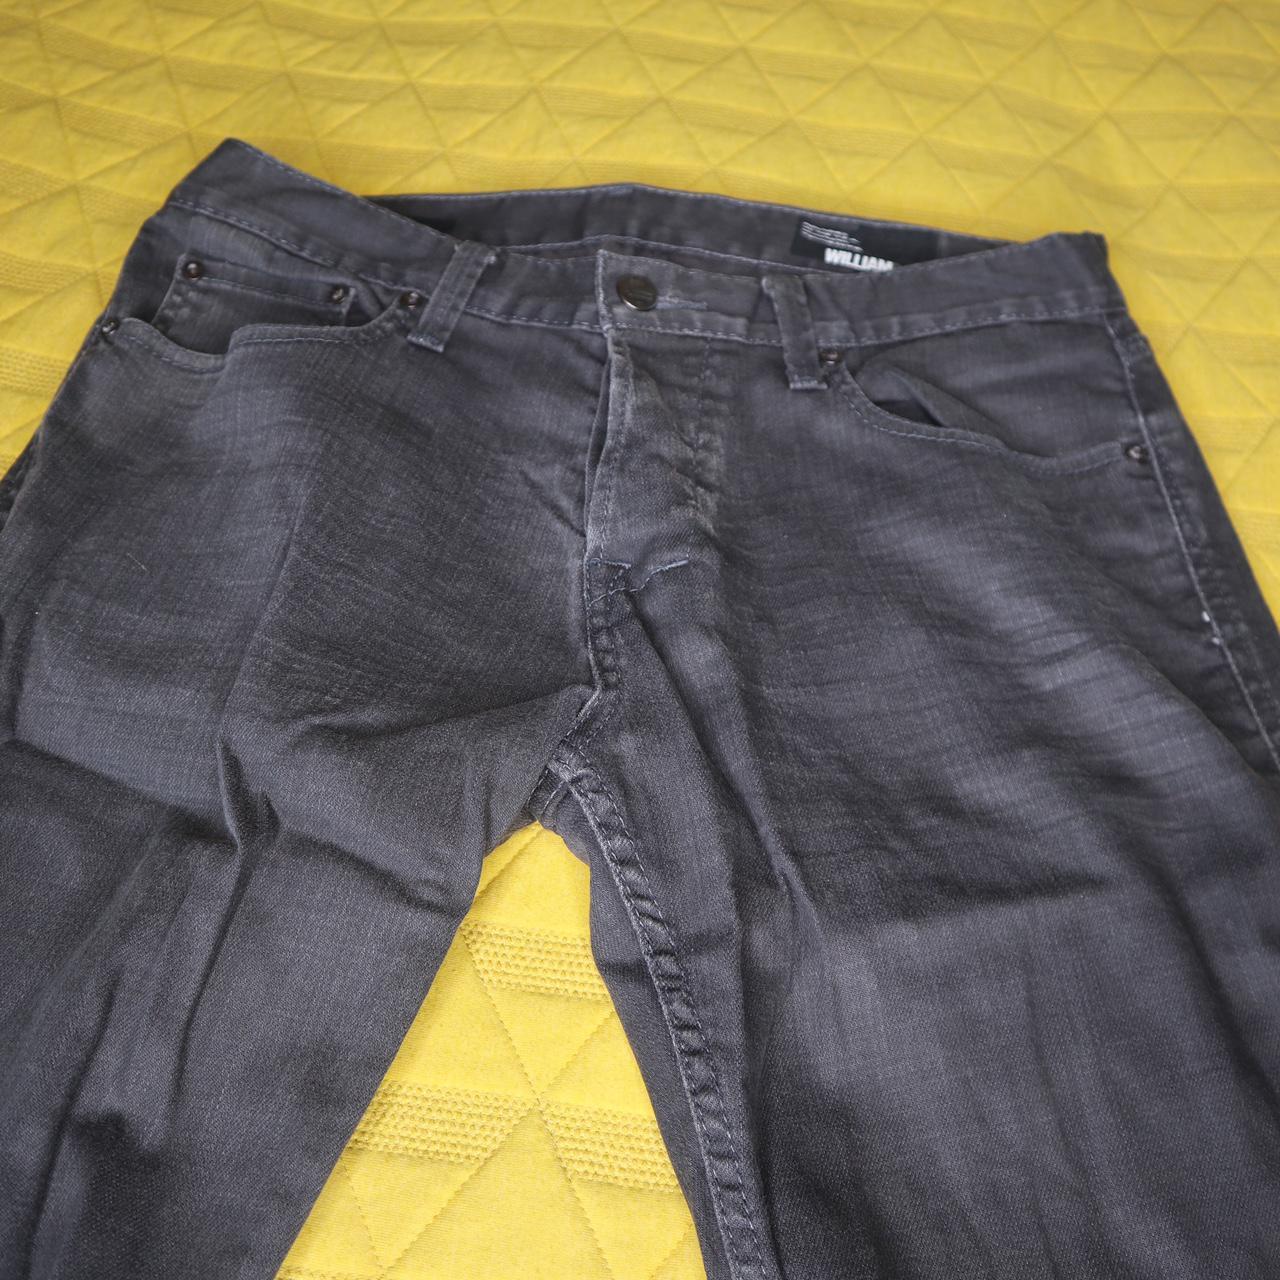 William Rast Justin Timberlake Tapered Jeans in size... - Depop